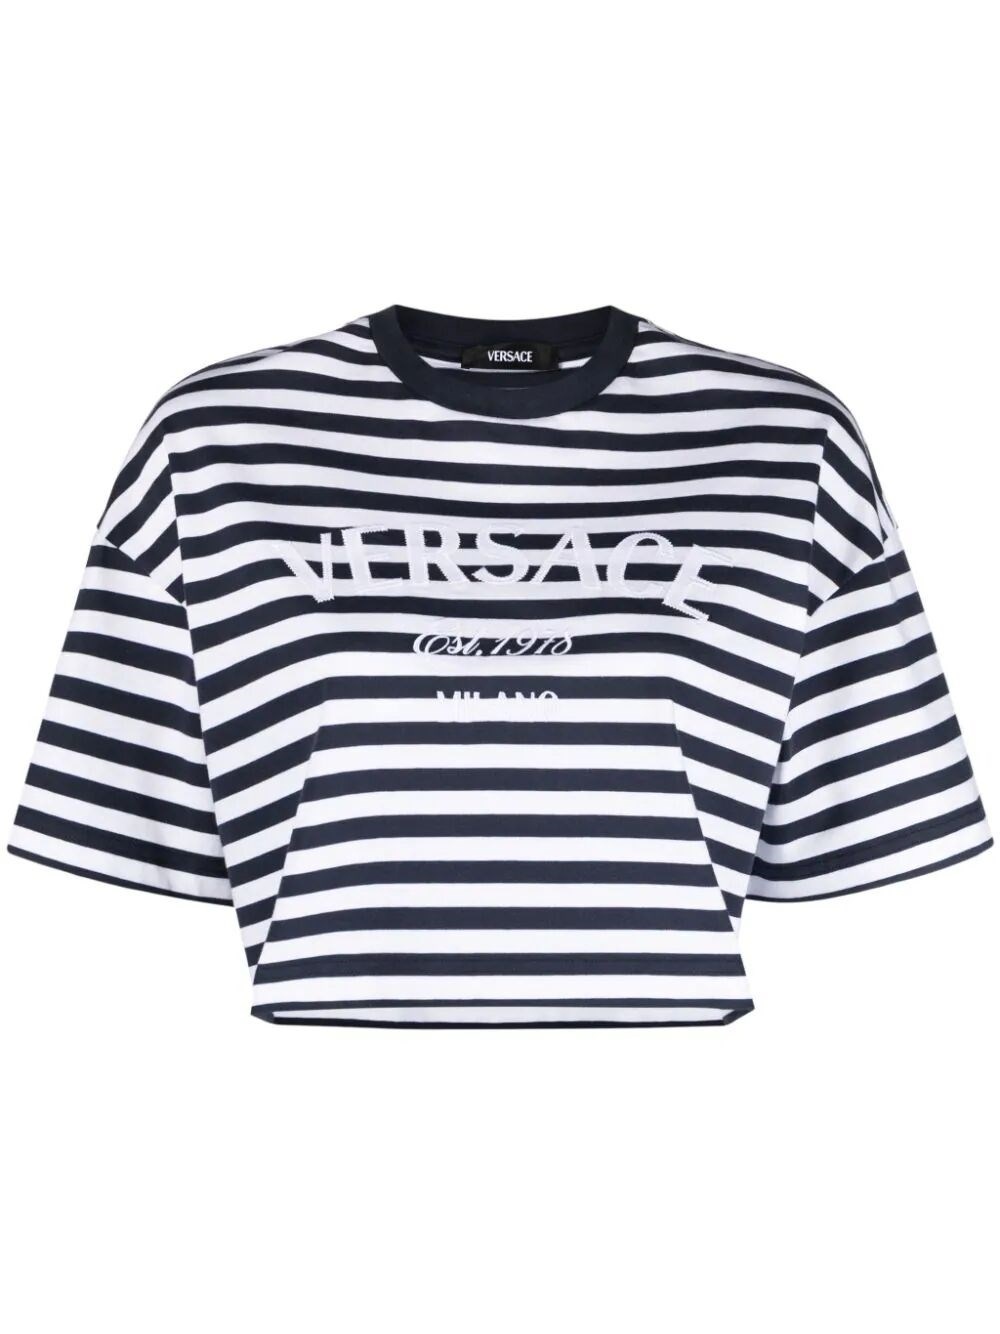 Nautical Stripes And Logo `Still Versace` Cropped T-Shirt - 1